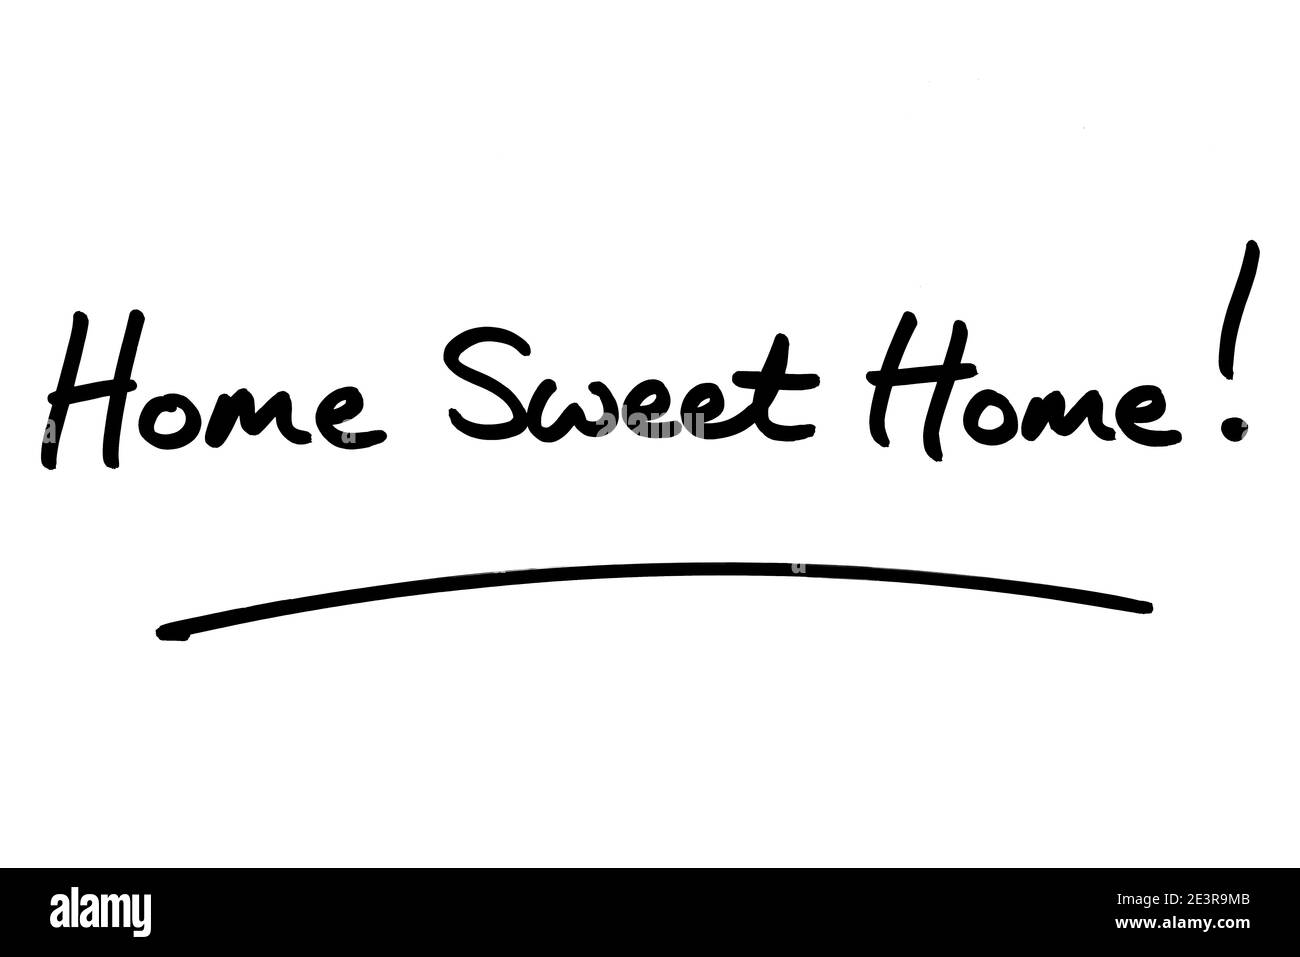 Home Sweet Home! handwritten on a white background. Stock Photo